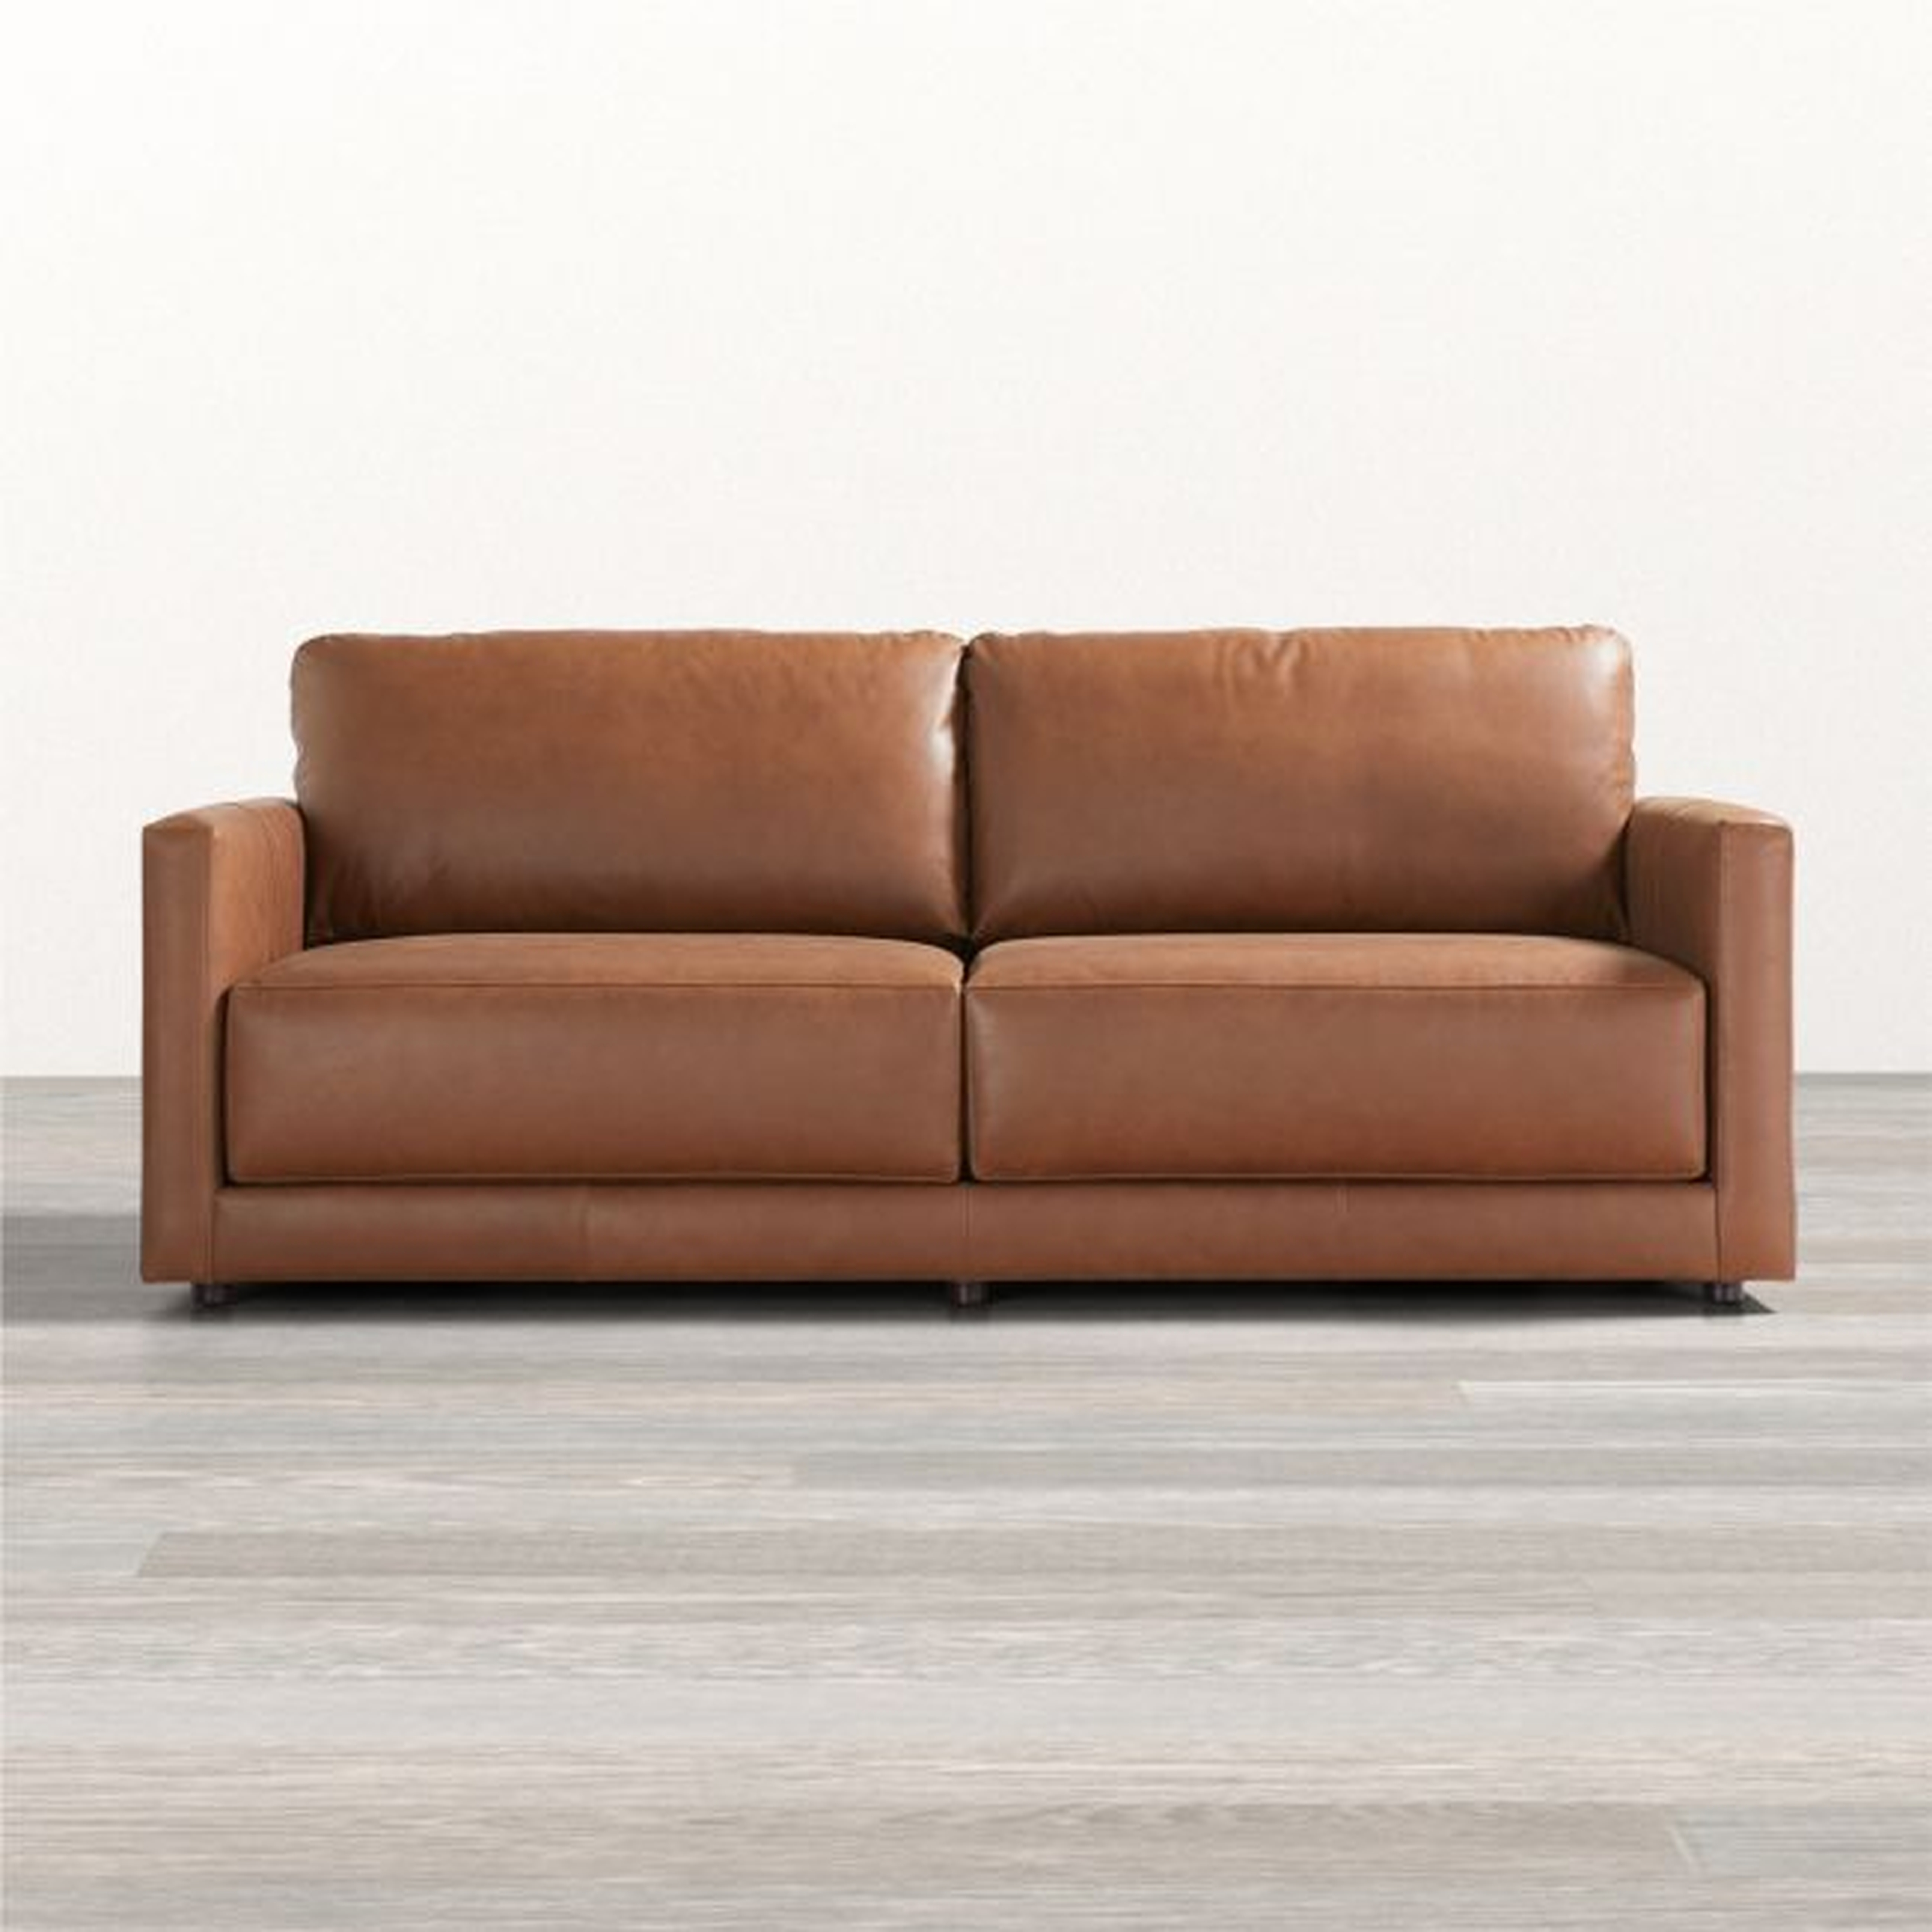 Gather Deep Leather Sofa - Crate and Barrel